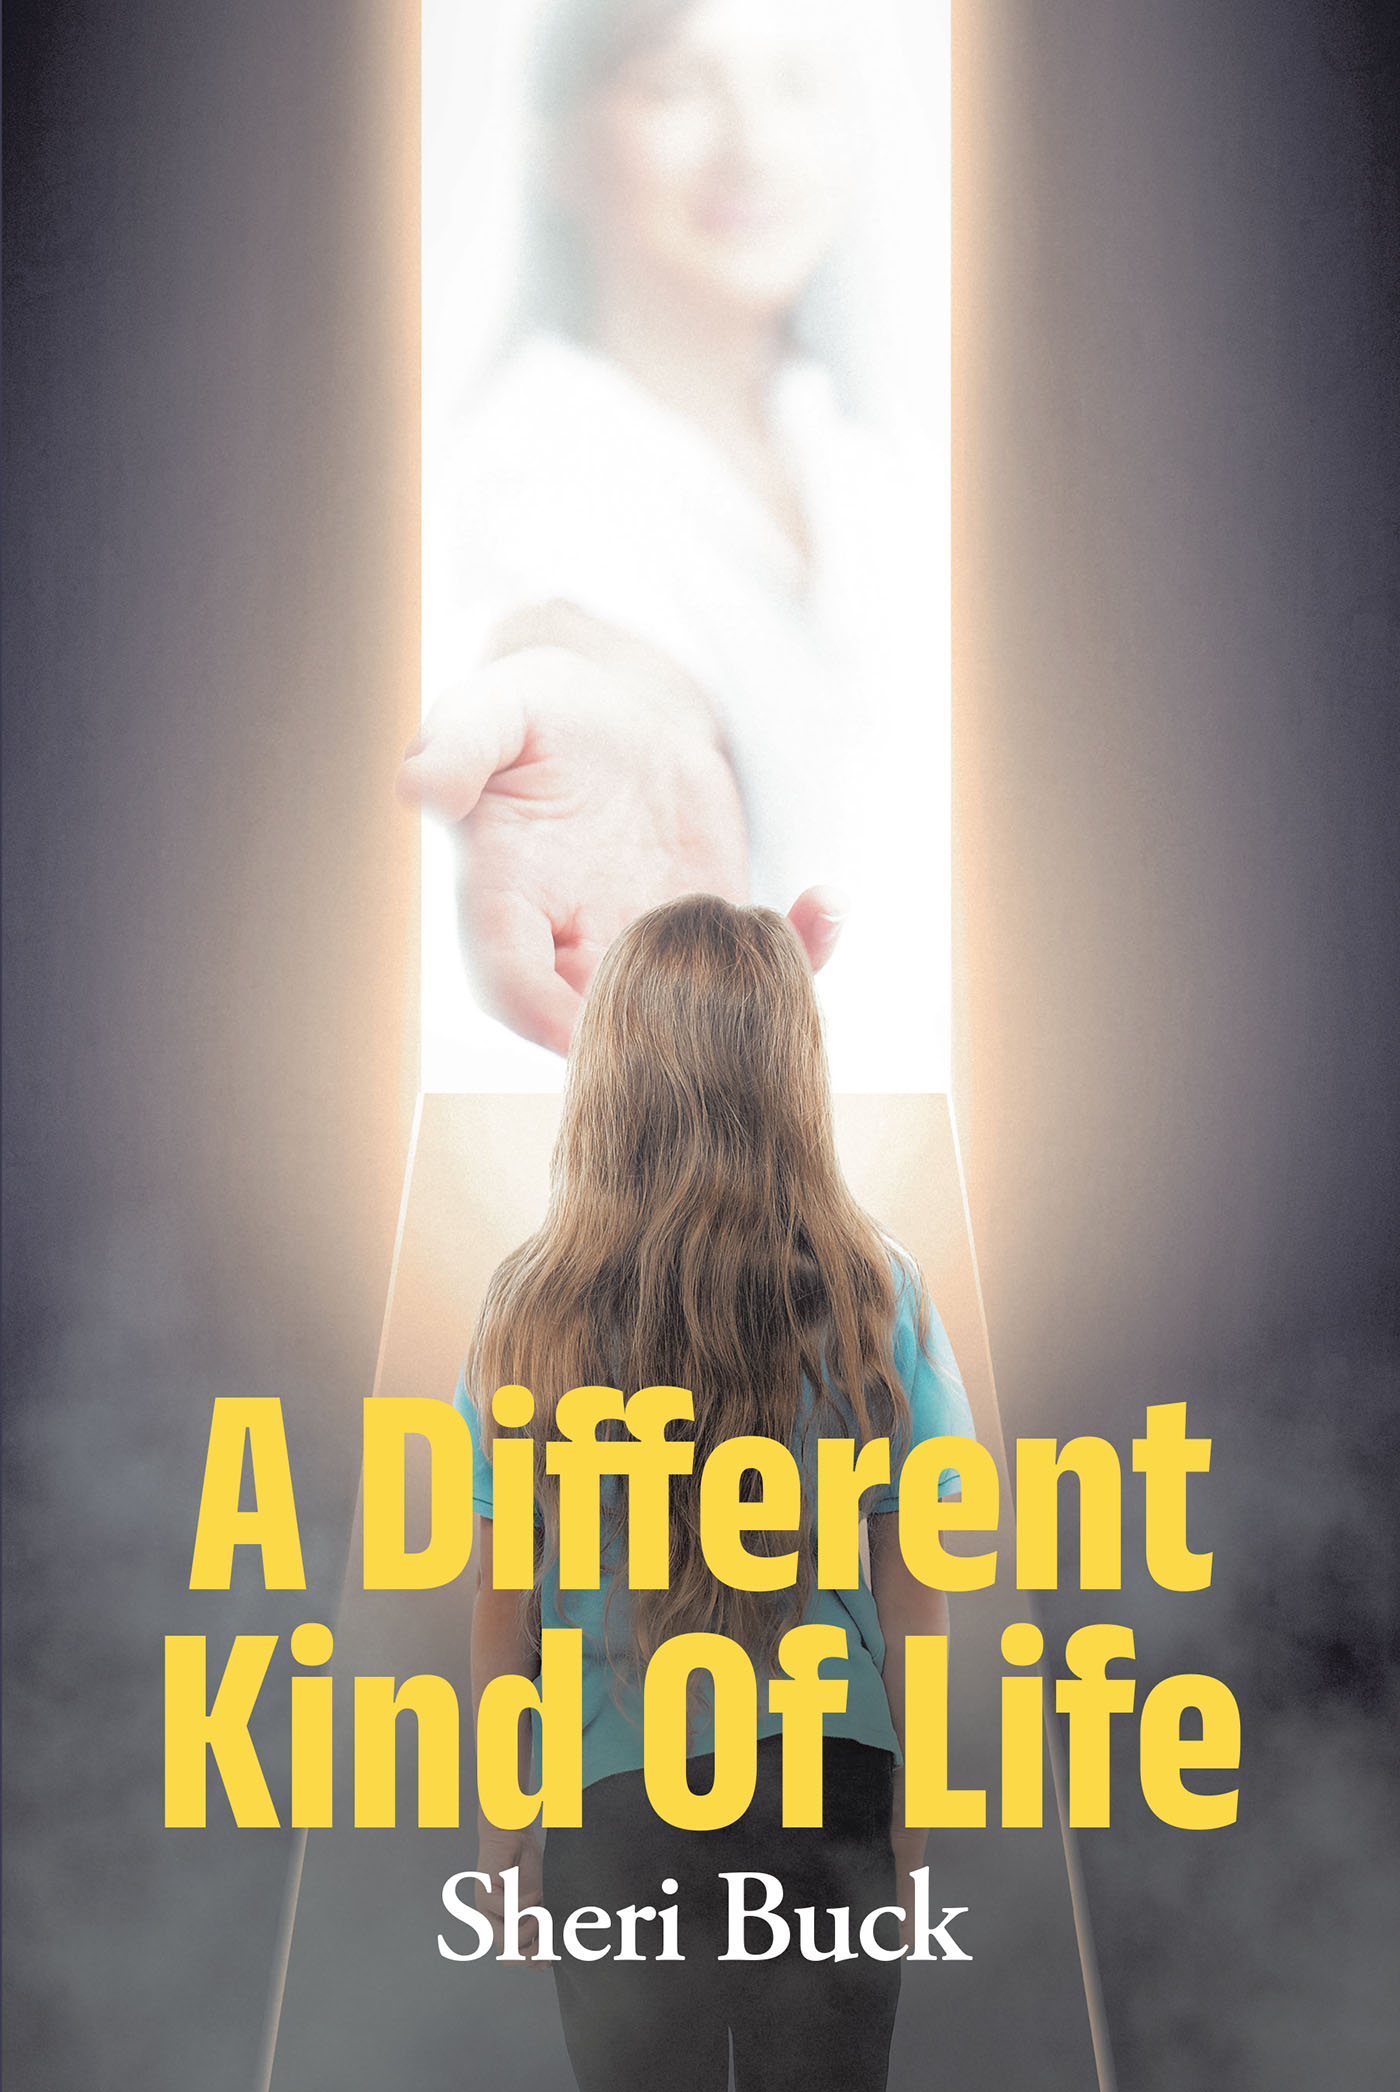 Sheri Buck’s New Book, "A Different Kind of Life," is a Stirring Account of How the Author Turned Her Life Around After Her Struggles with Addiction and Domestic Violence